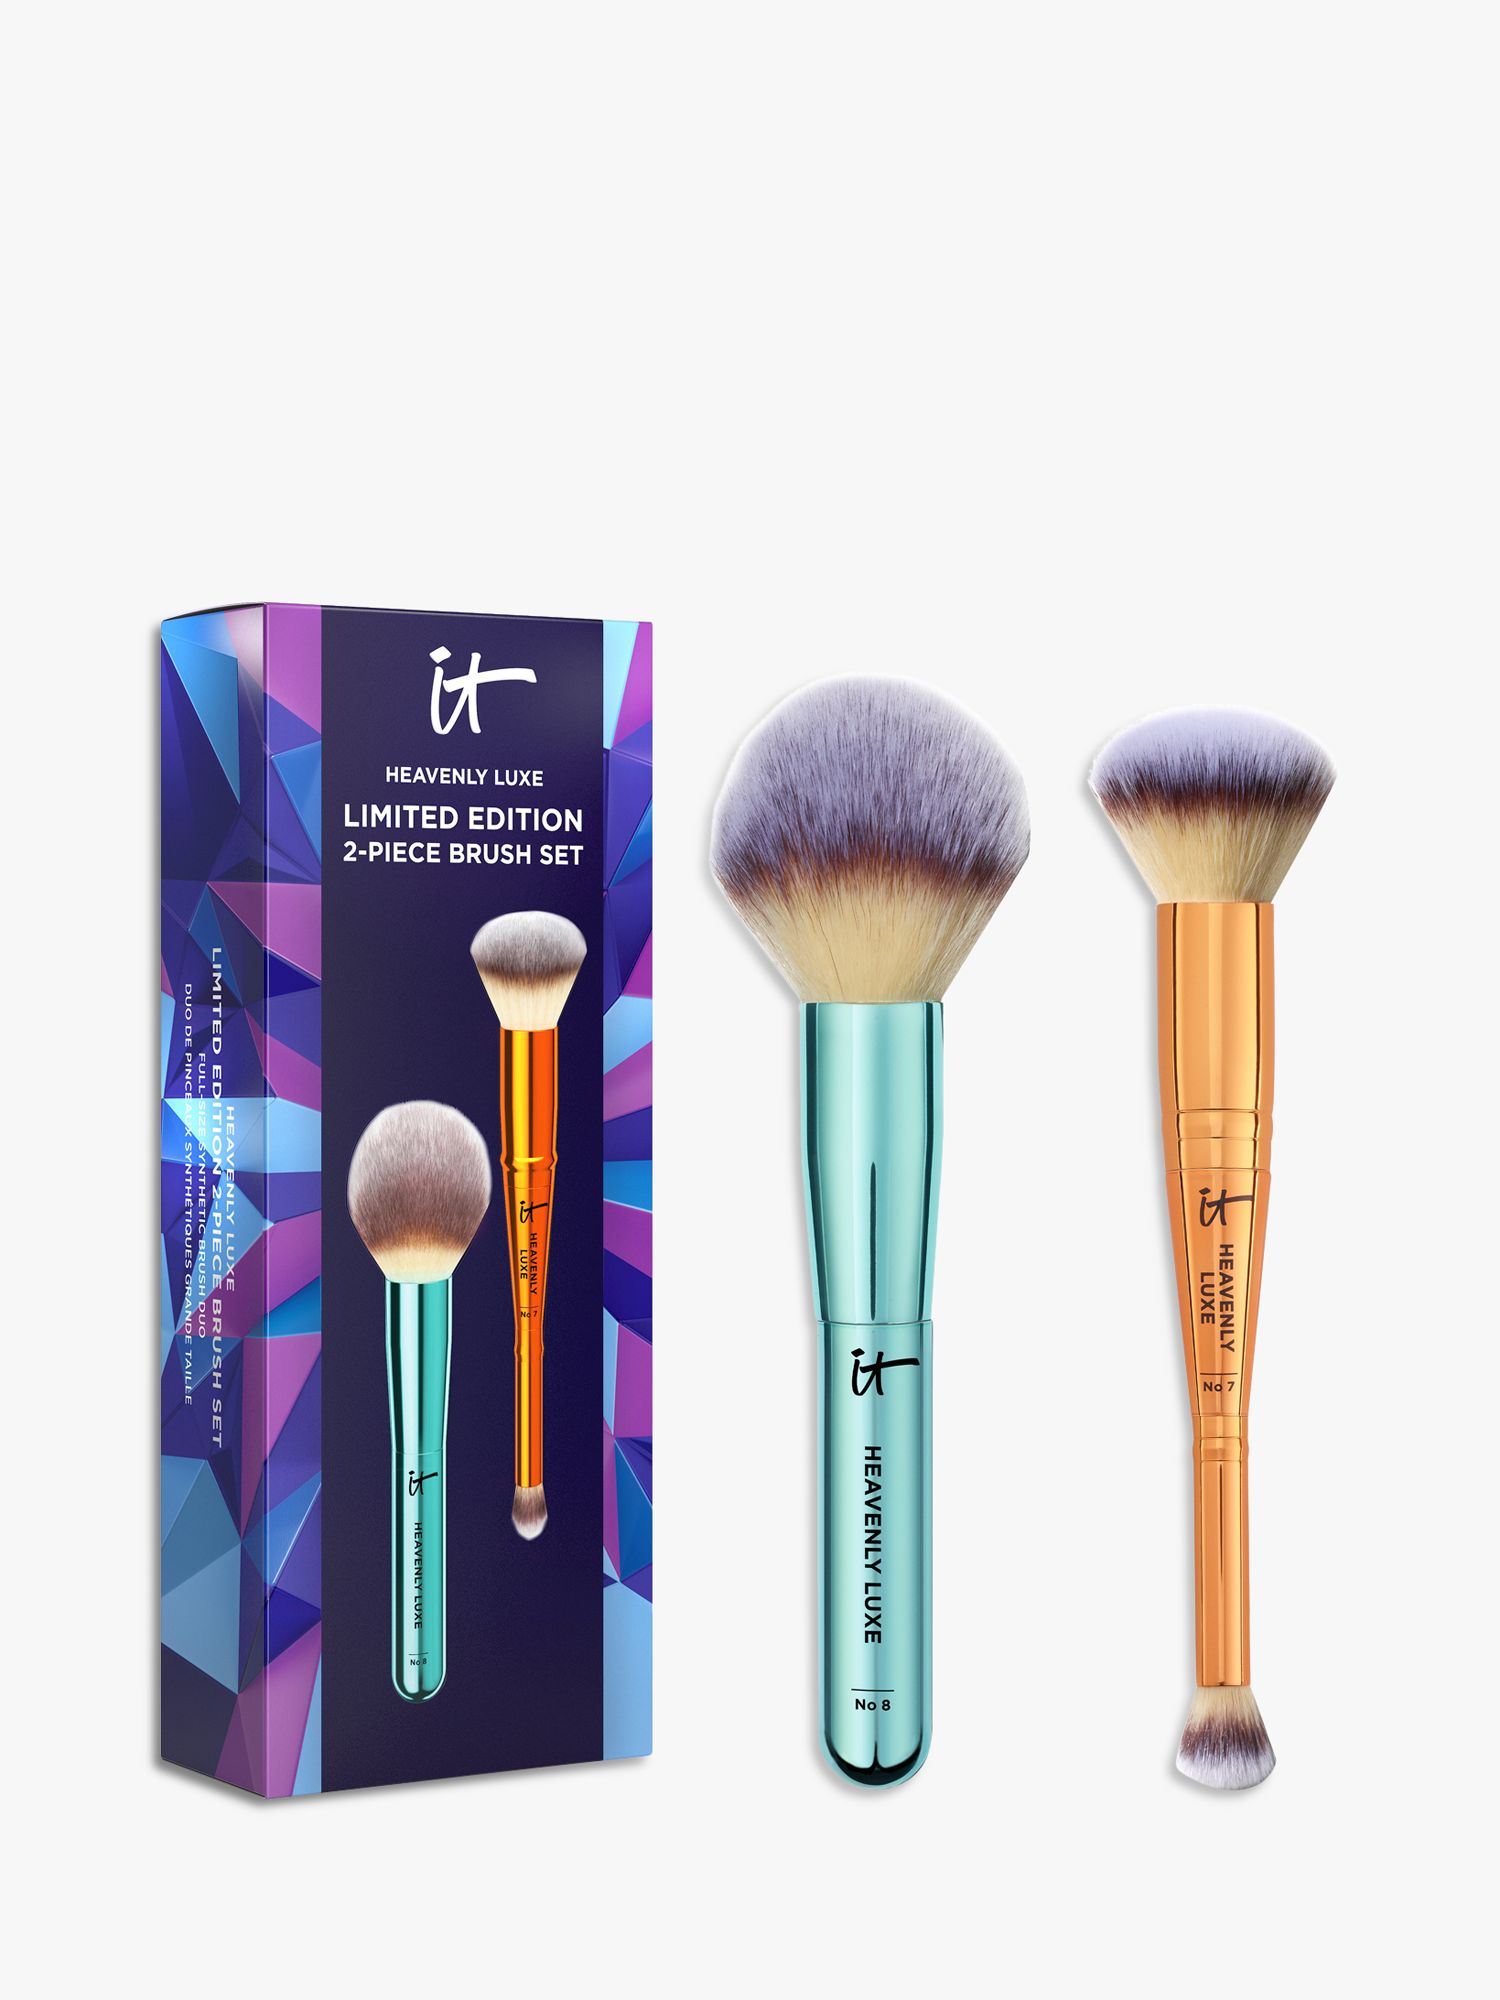 IT Cosmetics Heavenly Luxe Limited Edition Makeup Brush Gift Set 1